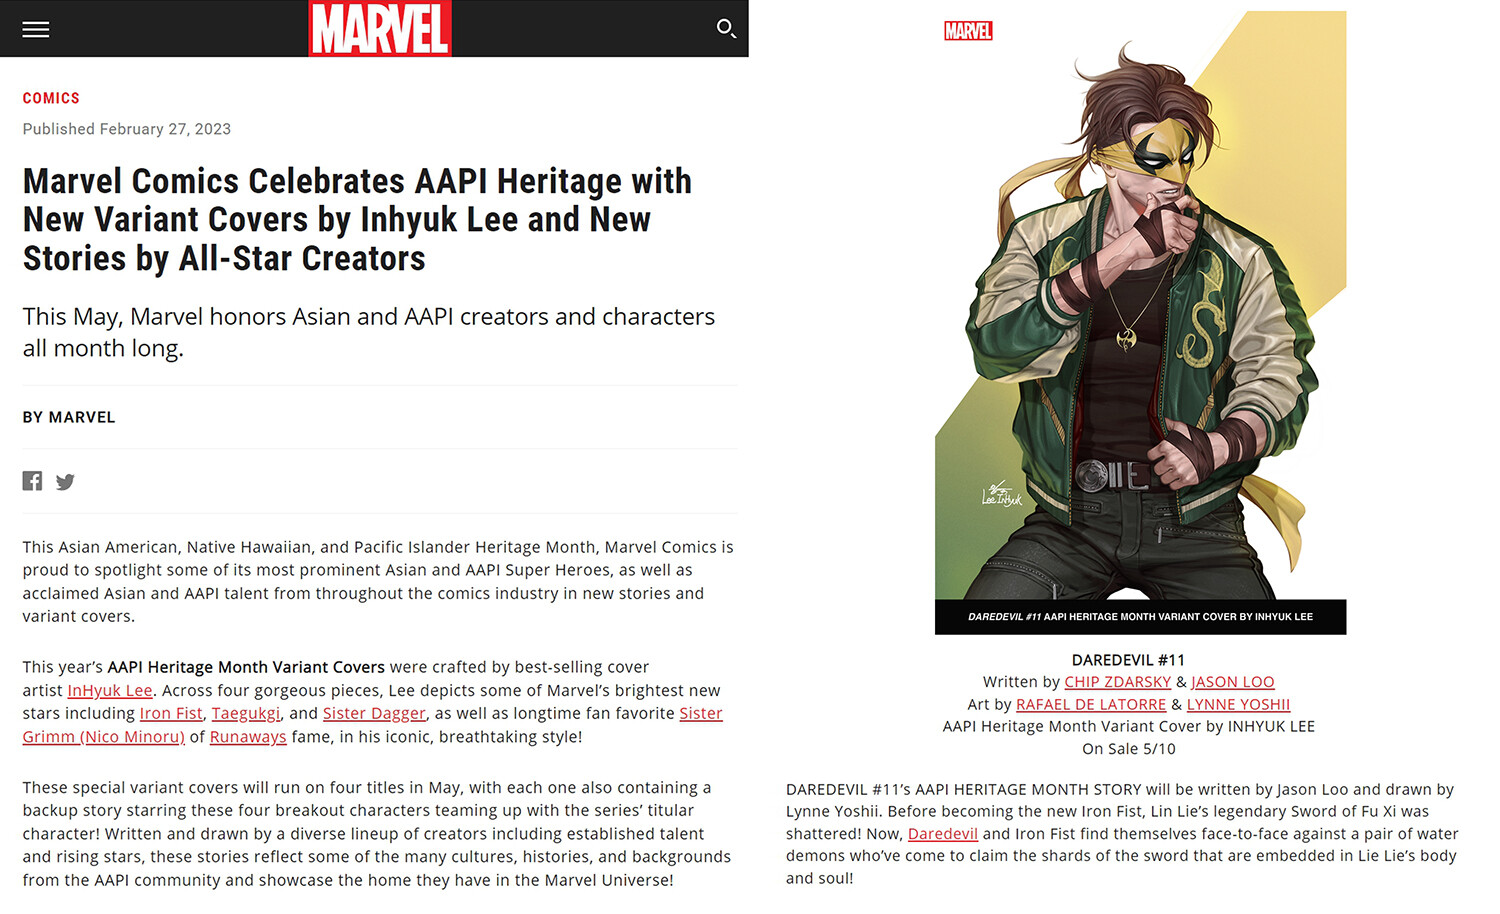 https://www.marvel.com/articles/comics/aapi-heritage-month-2023-variant-covers-inhyuk-lee-new-stories?linkId=203296304